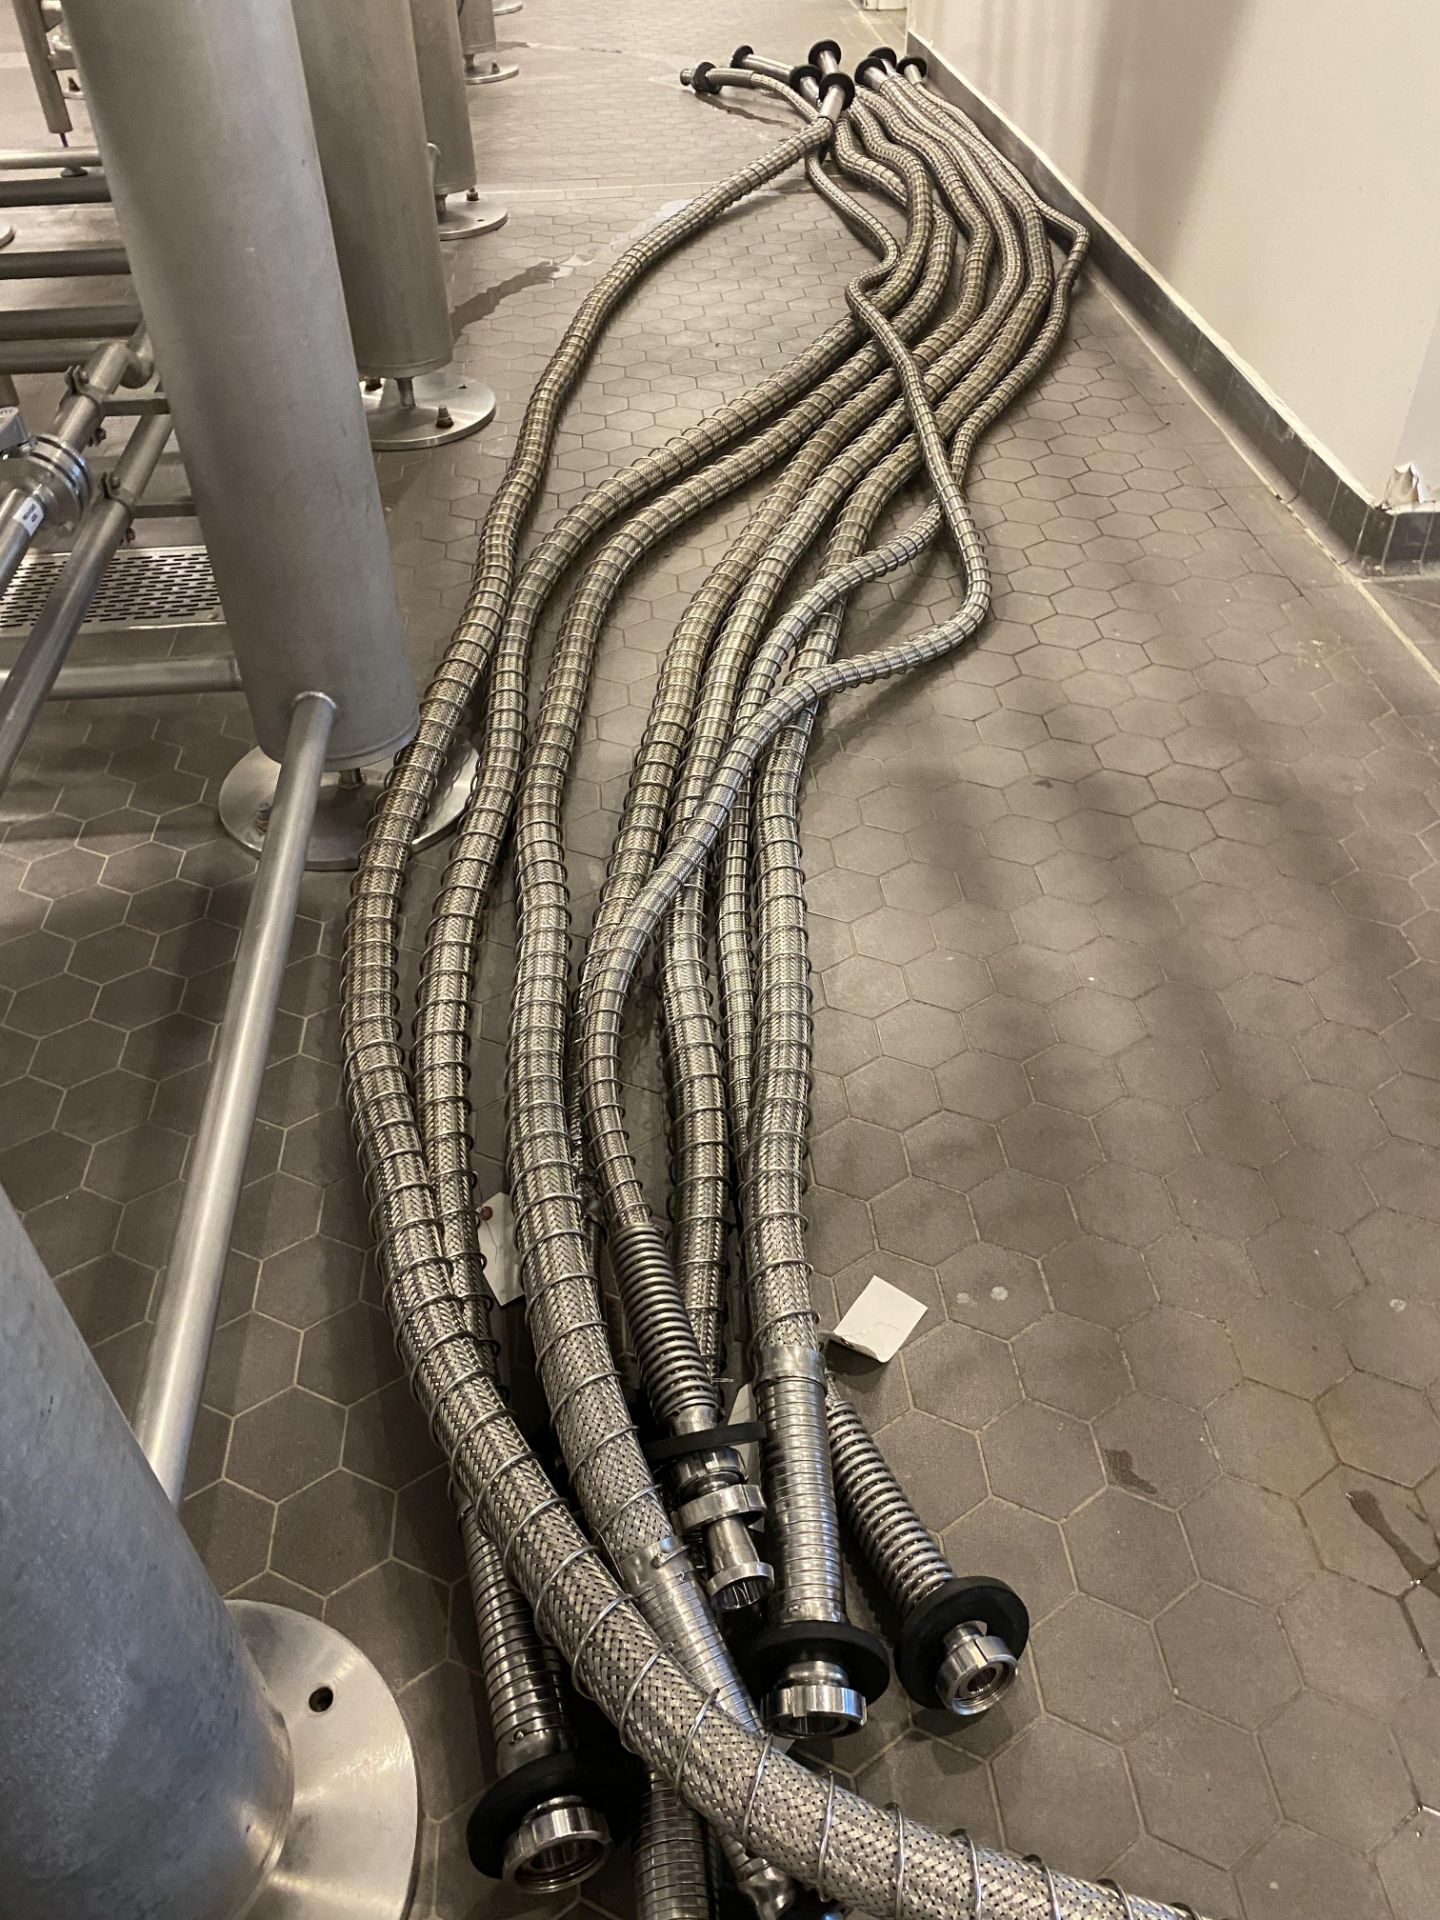 (2) 20' DN40 Braided Stainless Steel Hose w/DN40 Connectors On Each End